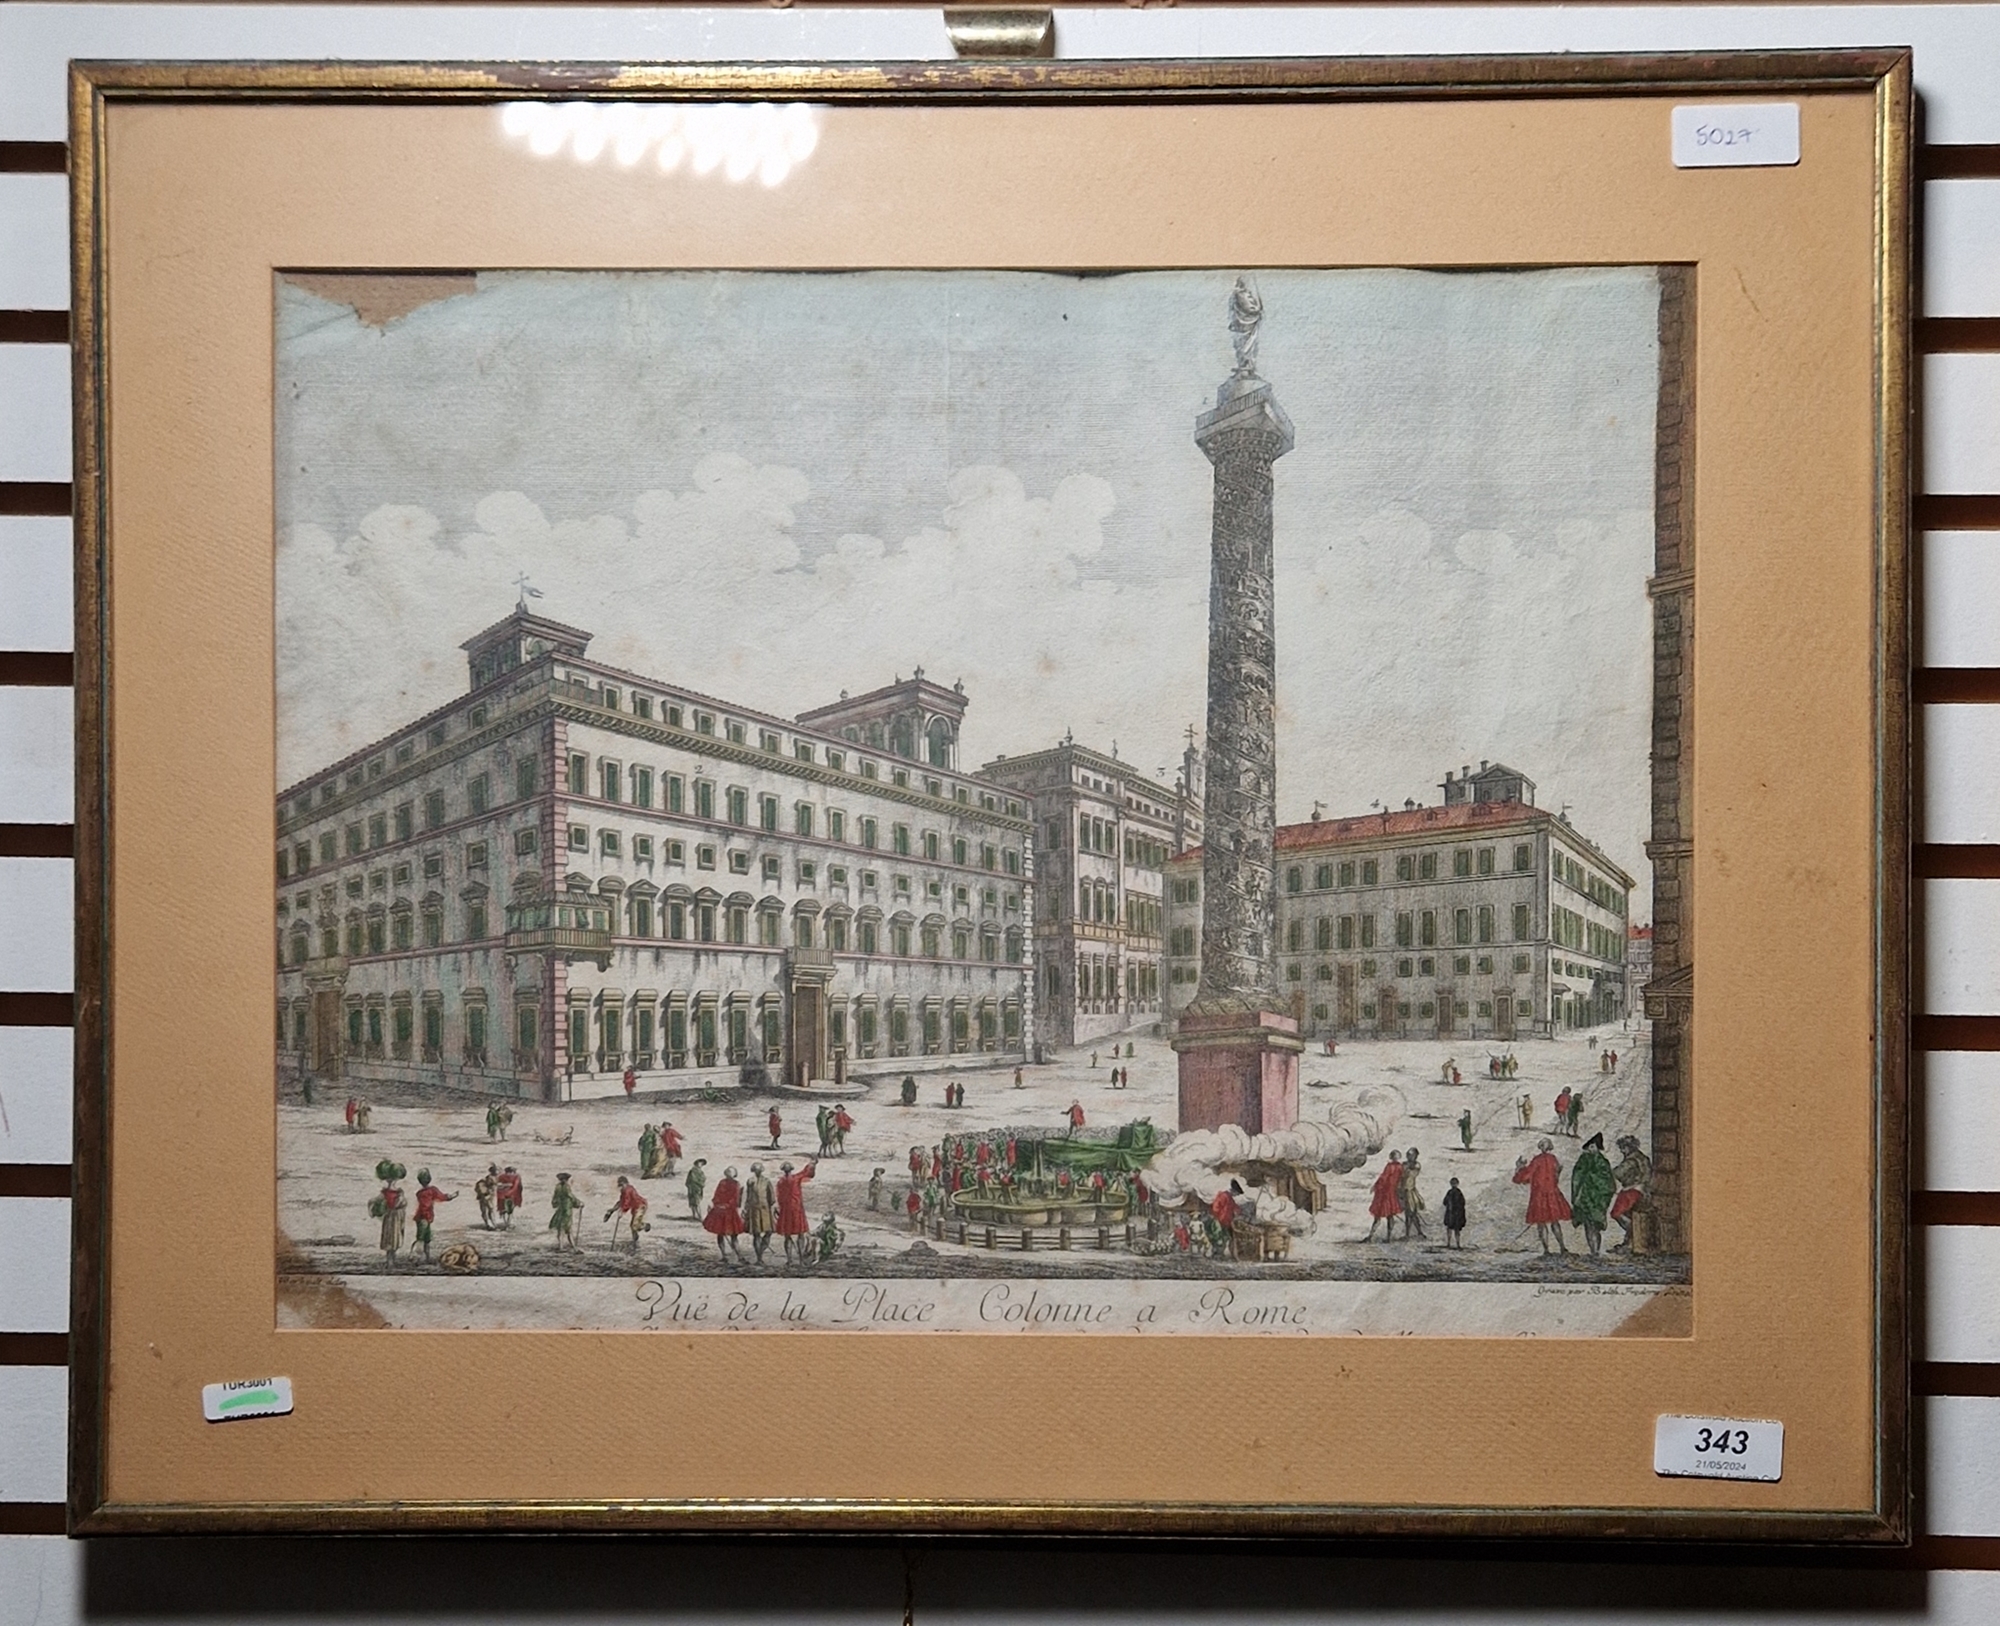 After Barbault, Vue de la Place Colonne a Rome, hand coloured engraving by Balthasar Frederic - Image 2 of 2